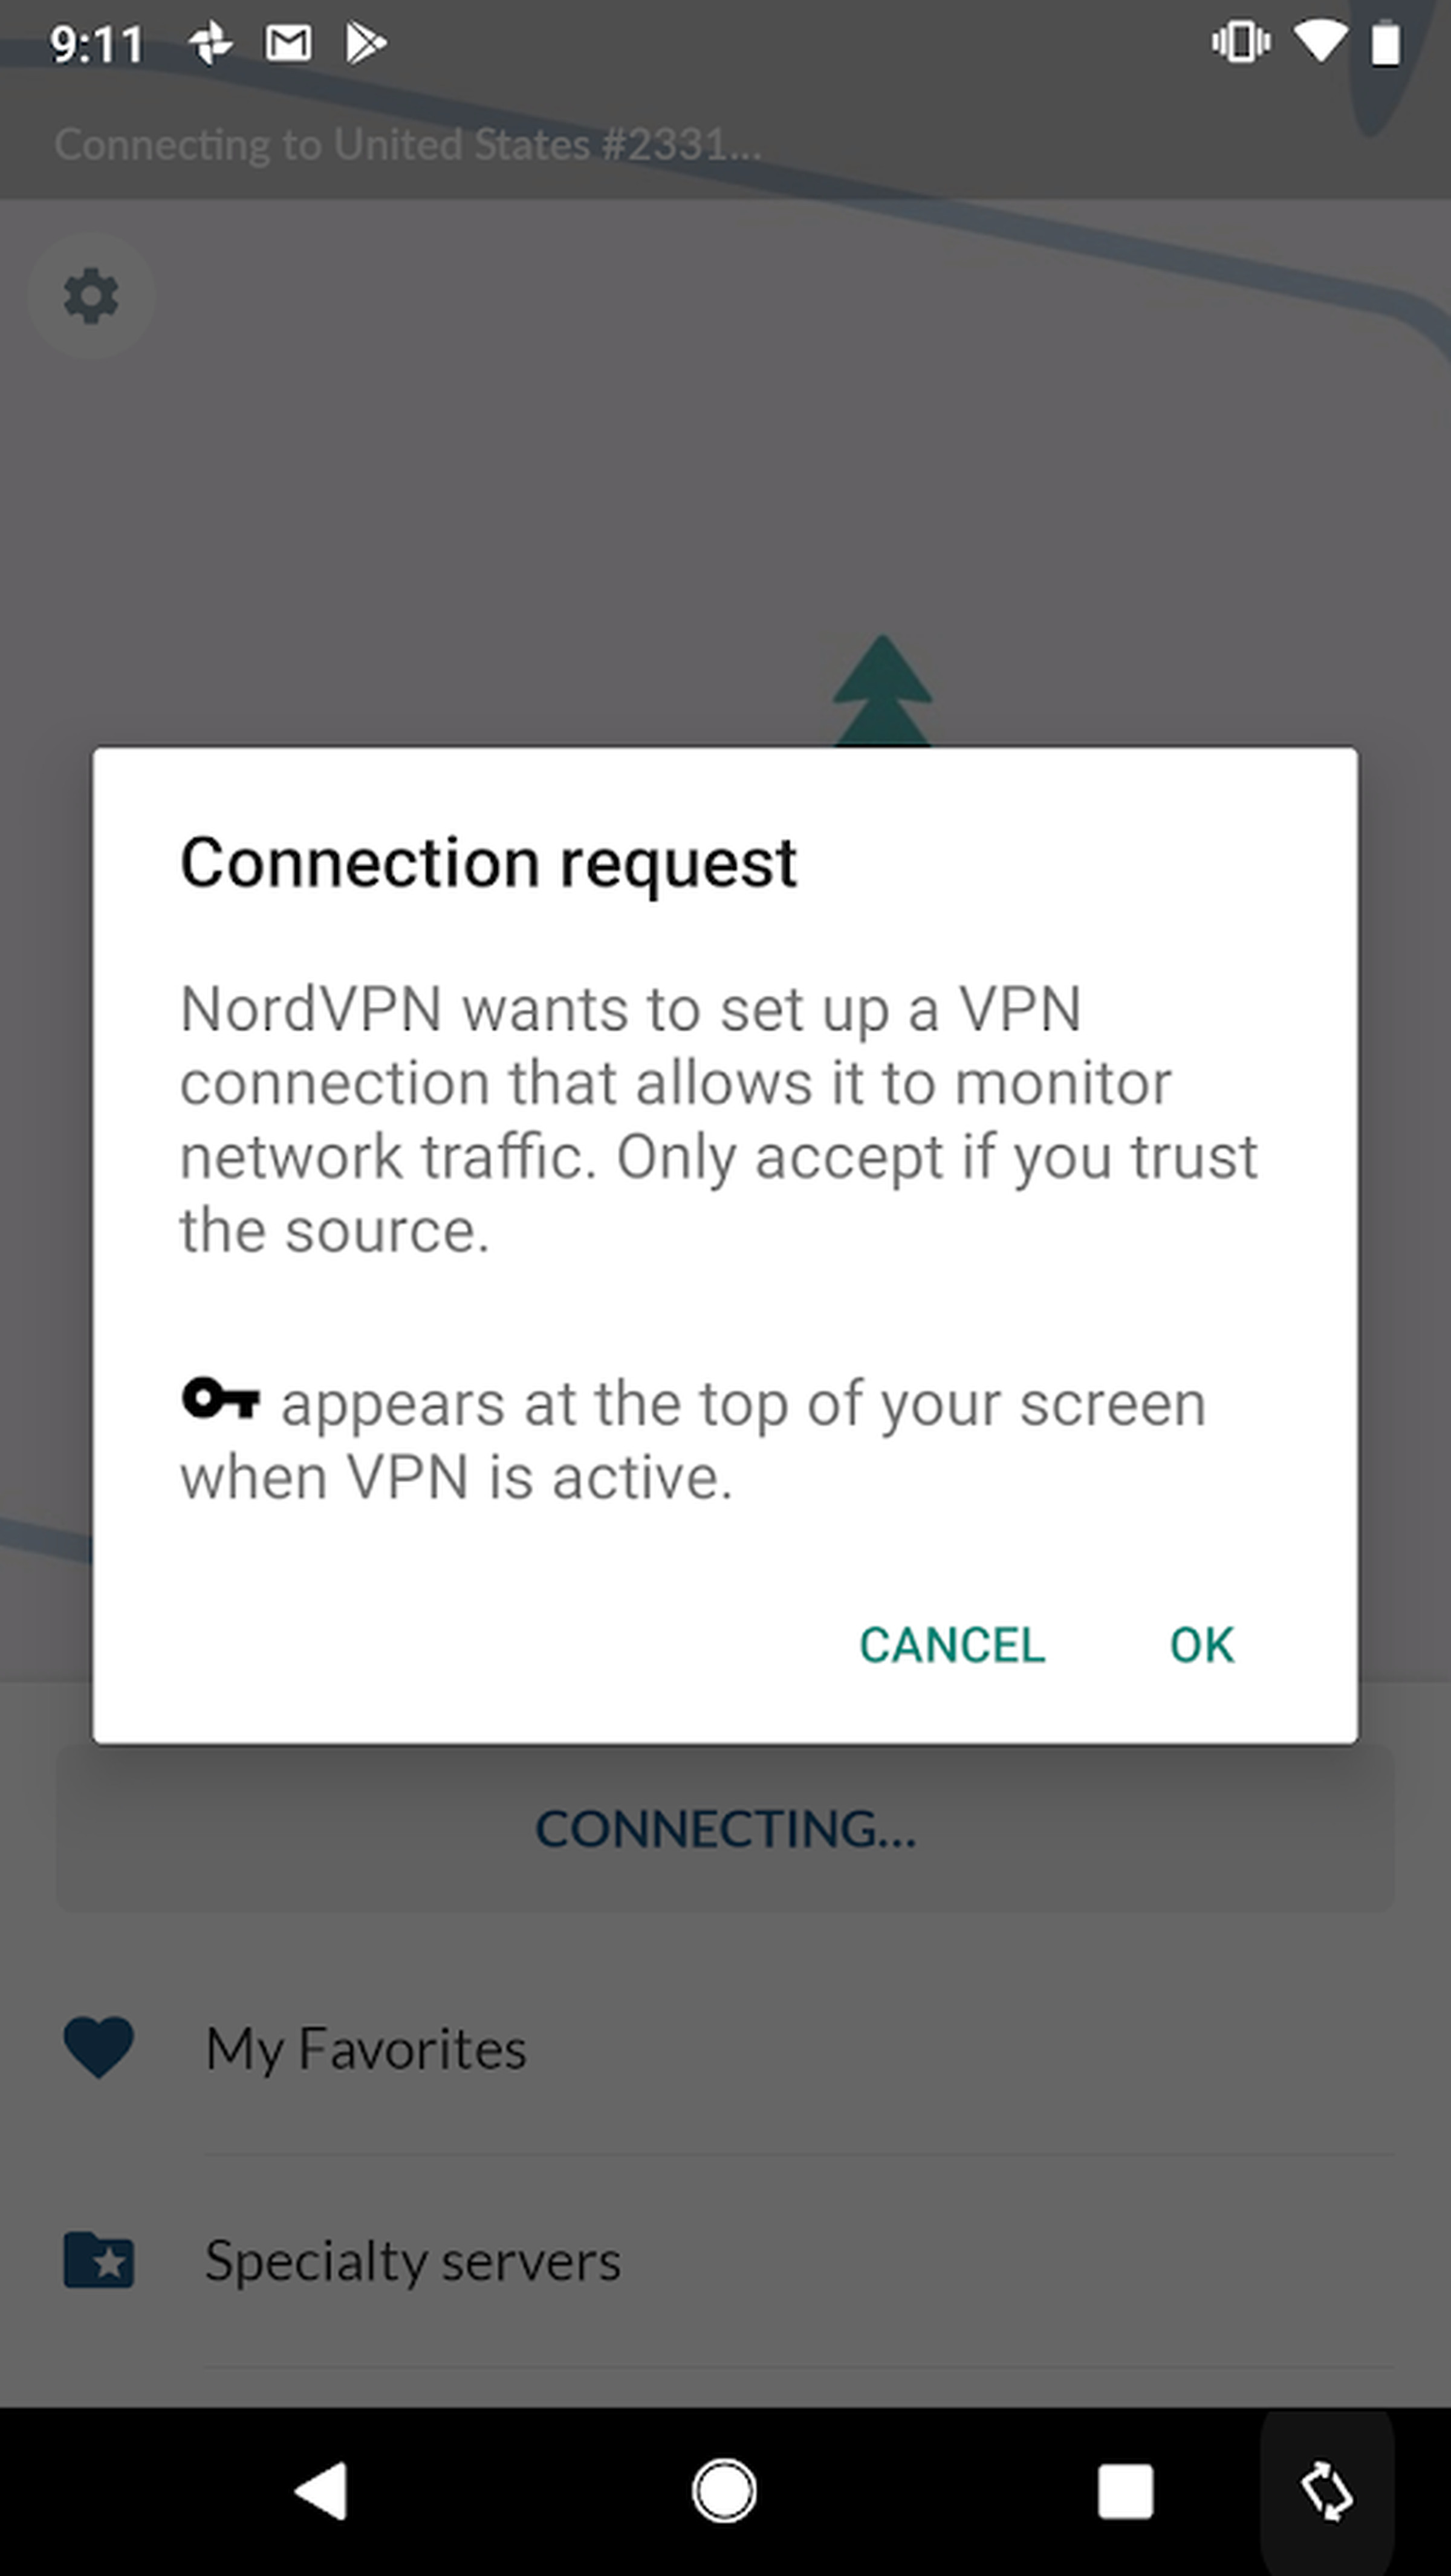 Just hit “OK” and you’ve got a VPN.